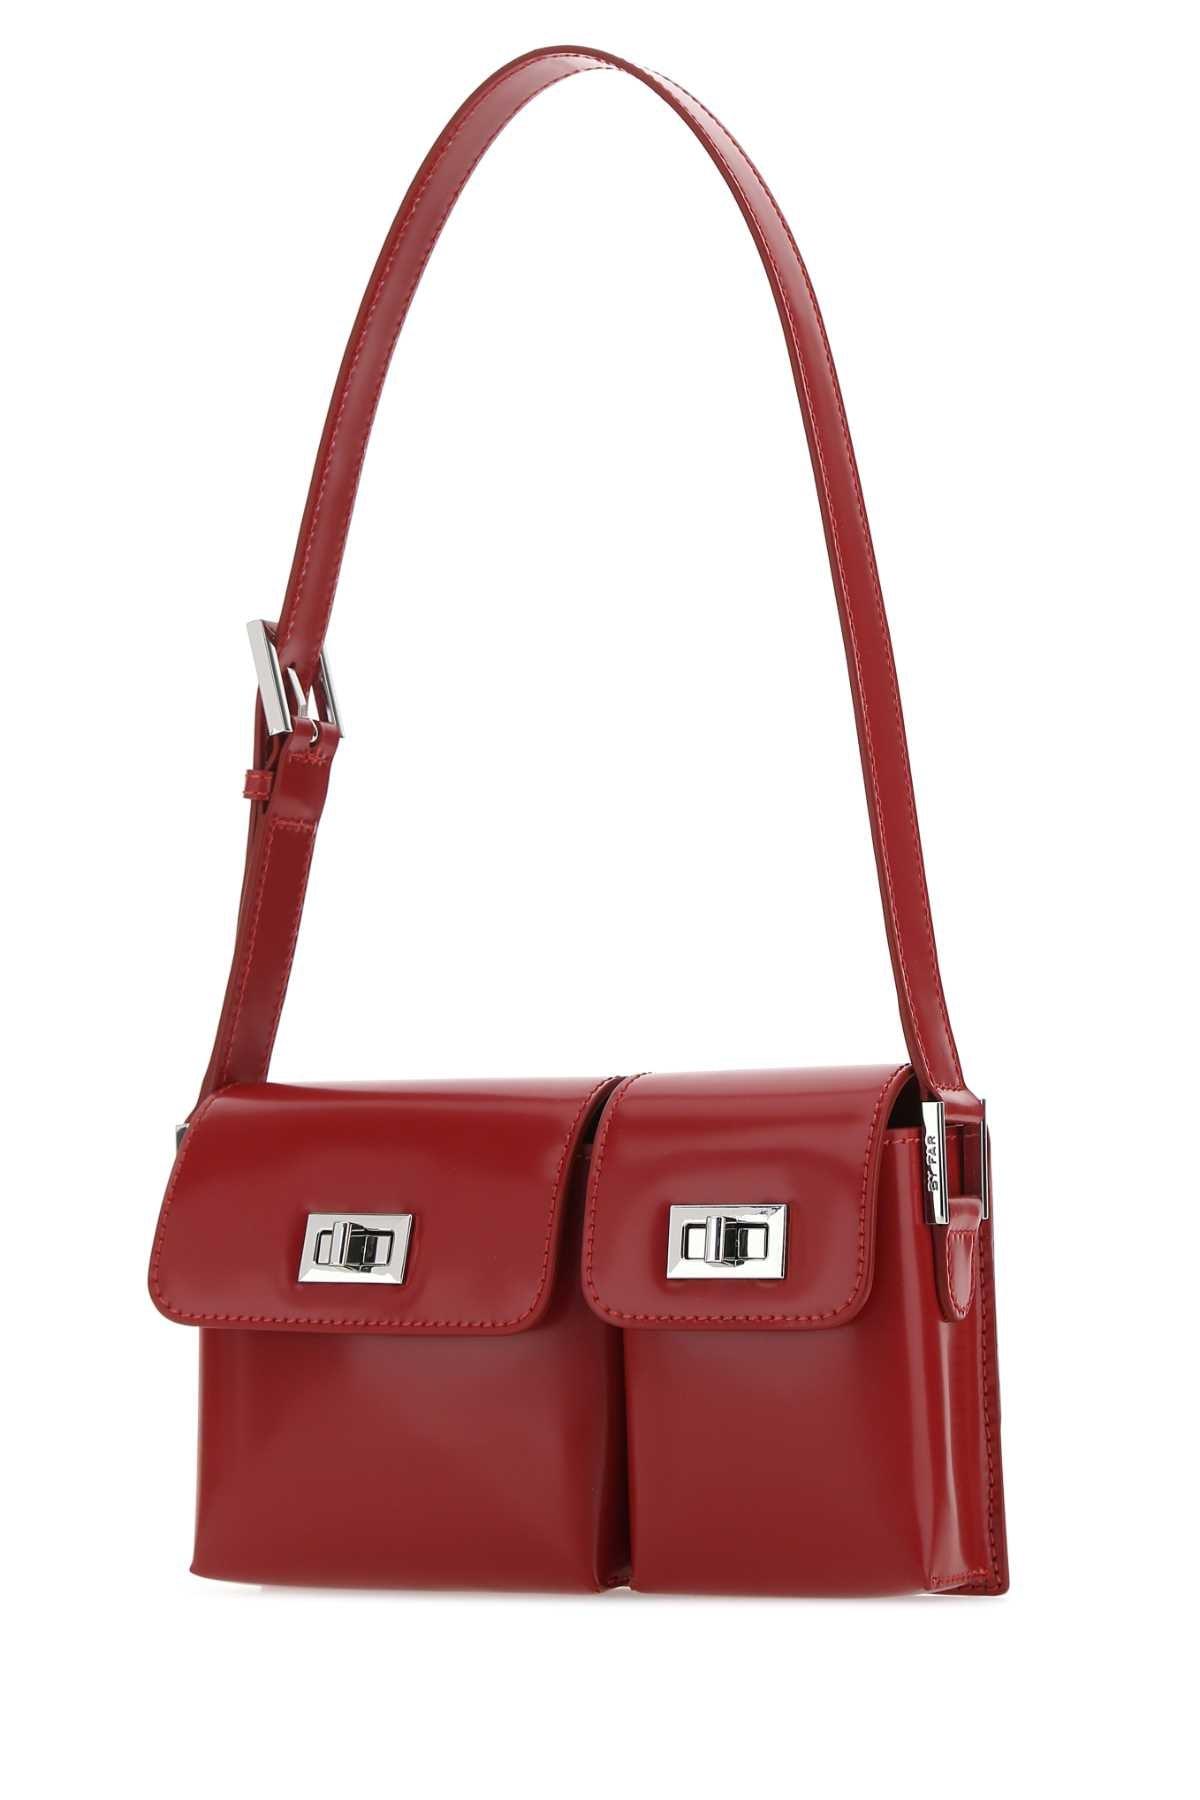 BY FAR Tiziano Leather Baby Billy Shoulder Bag in Red - Lyst